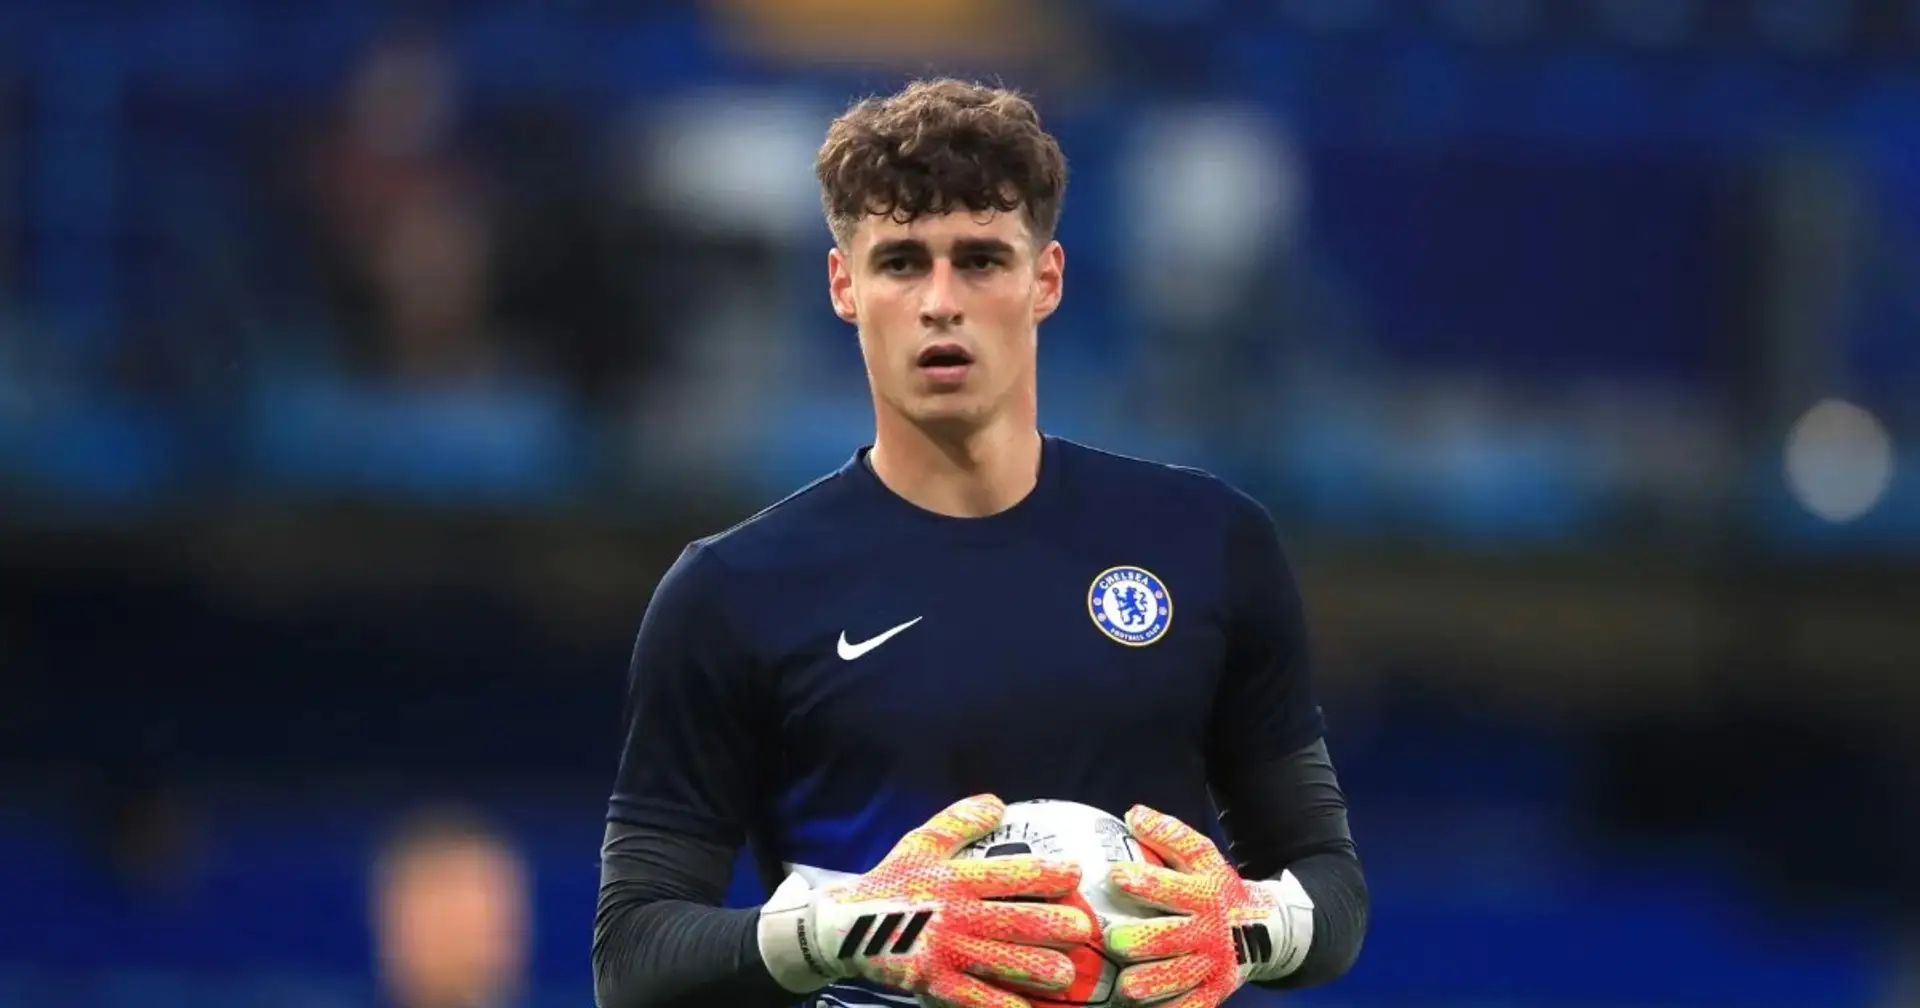 Granovskaia to give Kepa more time at Chelsea but chances running out: The Telegraph